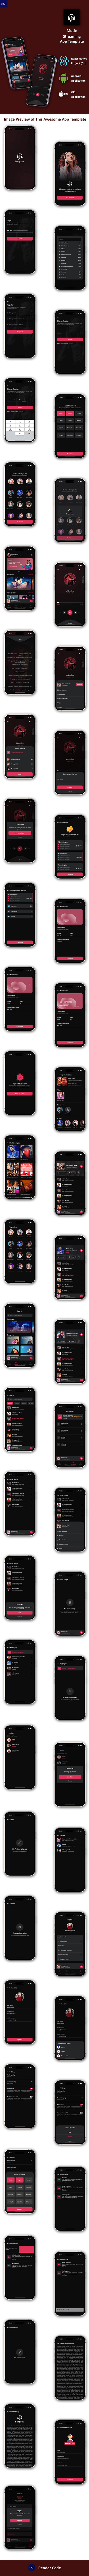 Online Music Streaming App | Music Player App | Music App | React Native CLI | Songster - 9